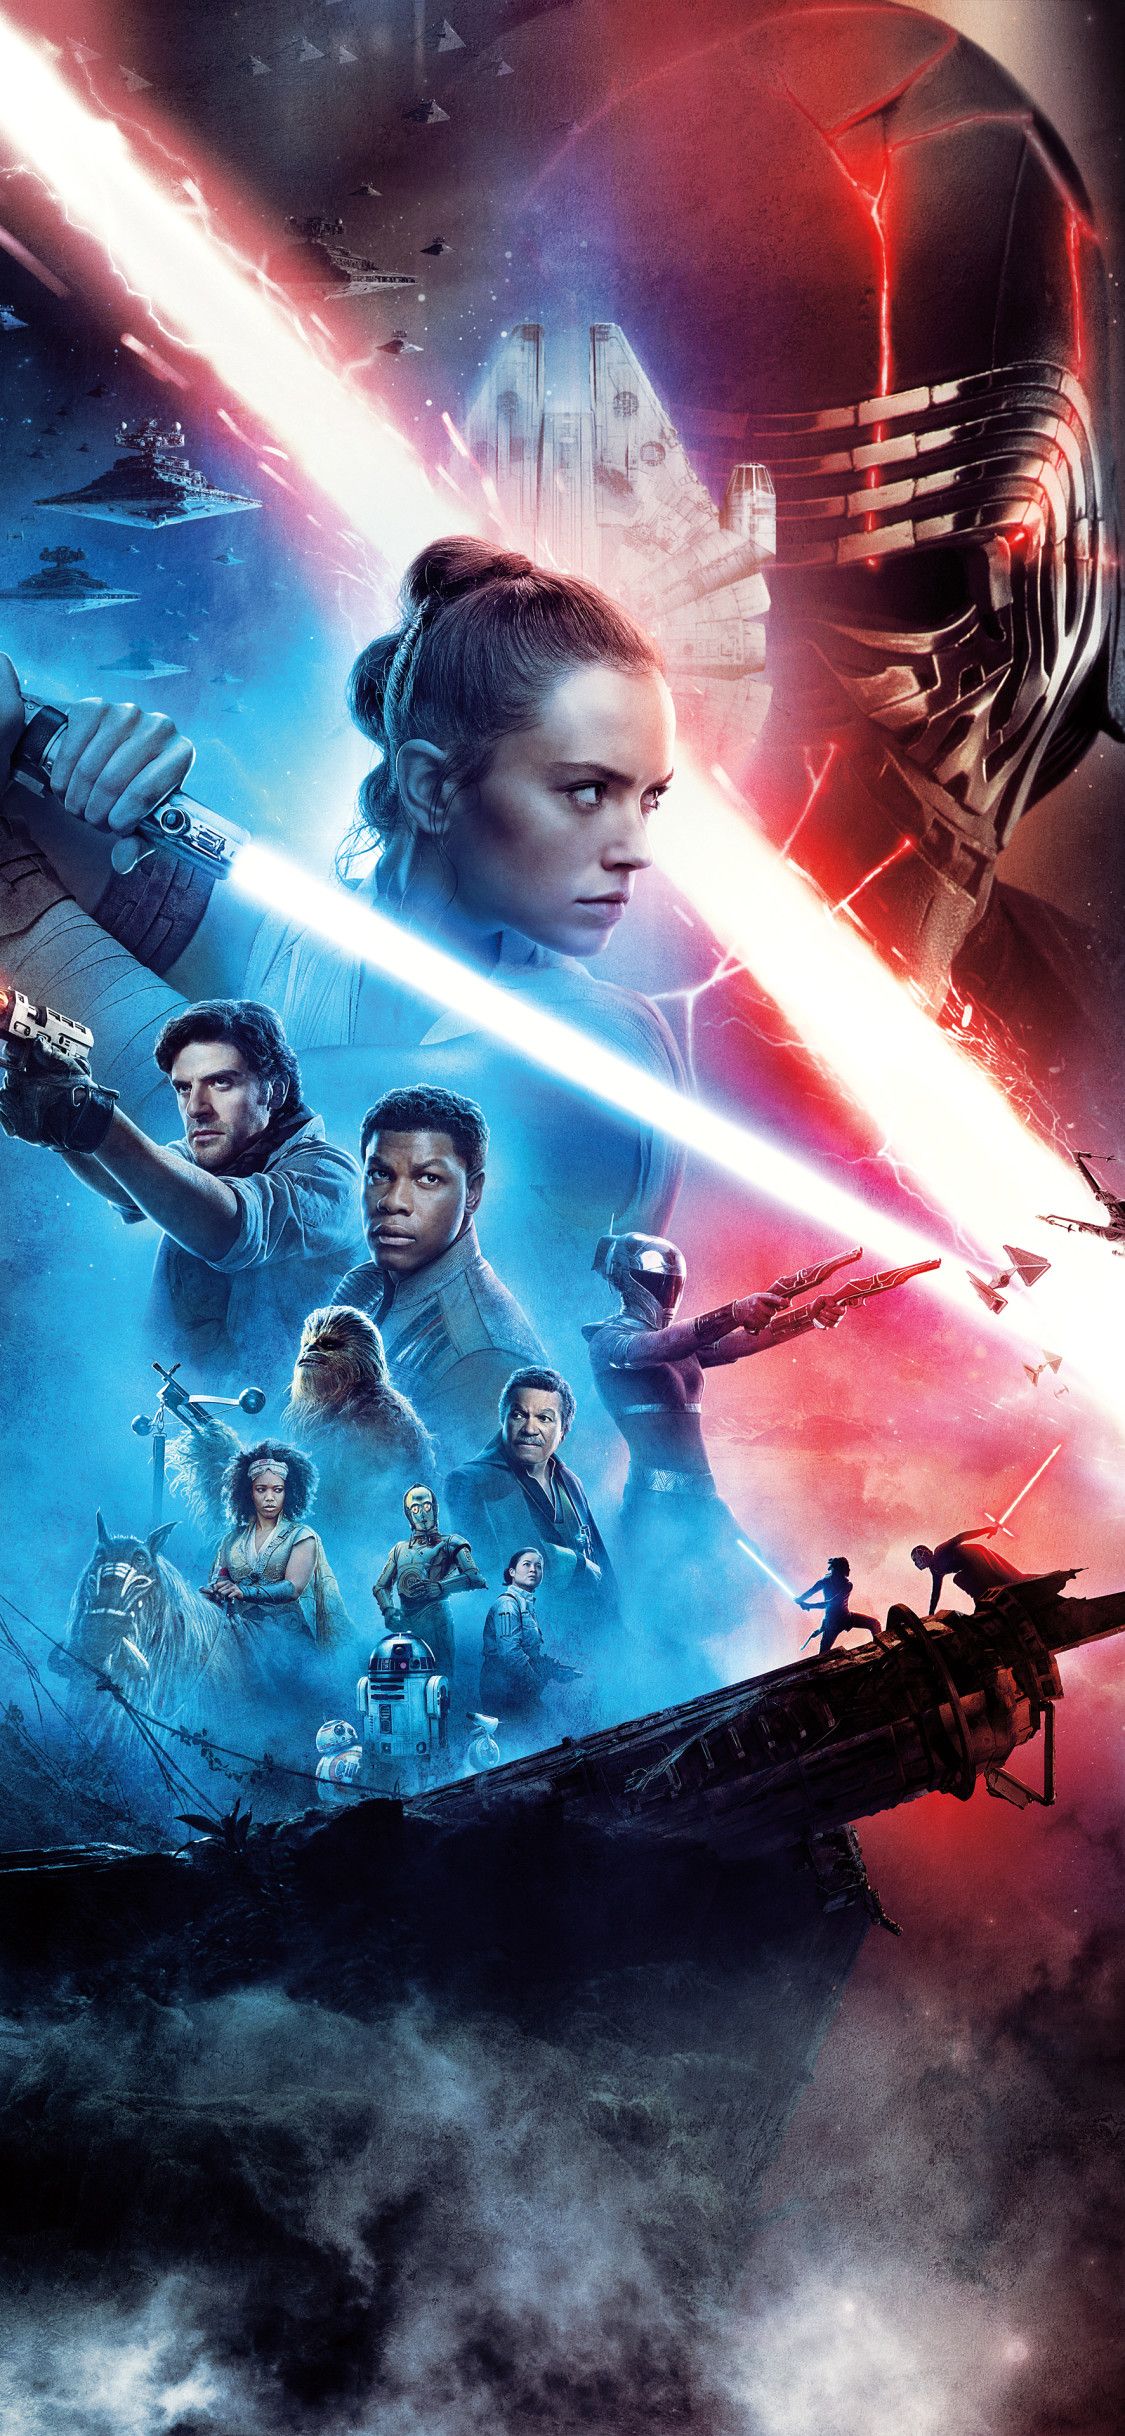 Star Wars: The Rise of Skywalker for iphone download